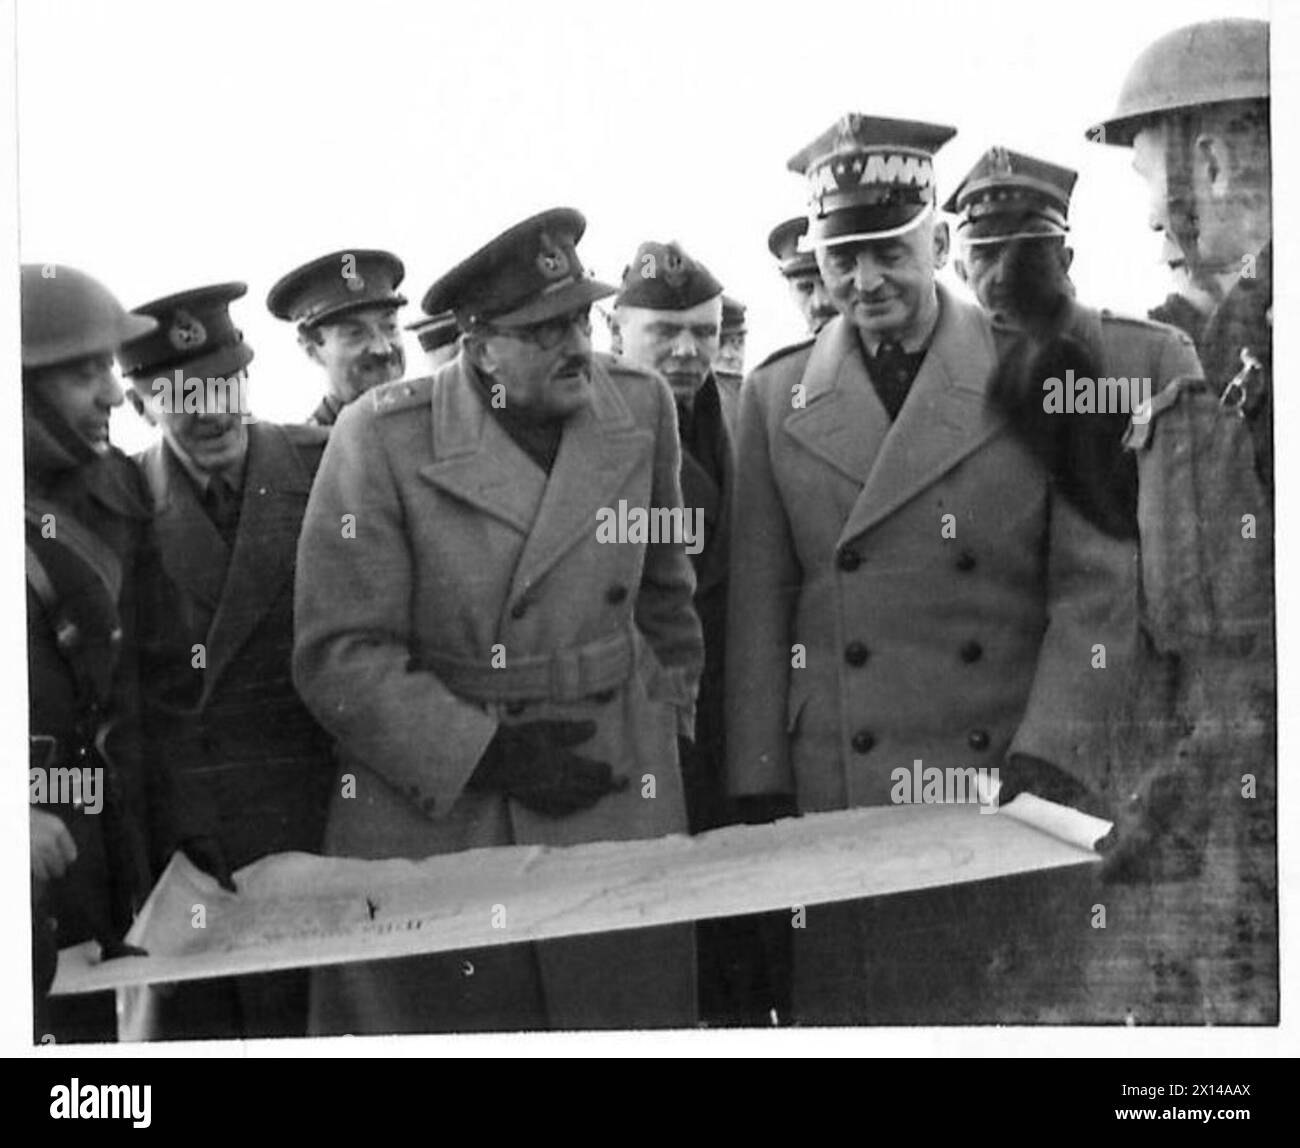 THE POLISH ARMY IN BRITAIN, 1940-1947 - General Alan Brooke, the C-in-C of the Home Forces, and General Władysław Sikorski, the C-in-C of the Polish Armed Forces, inspecting a map of coastal defences locations at Broughty Ferry, 11 December 1940. They are flanked by General Harold Carrington, the Commander of the Scottish Command (second from the left), and General Tadeusz Klimecki, the Chief of the Polish General Staff (second from the right).Photograph taken during General Brooke's visit the 1st Corps units in Dundee area British Army, Scottish Command, Polish Army, Polish Armed Forces in th Stock Photo